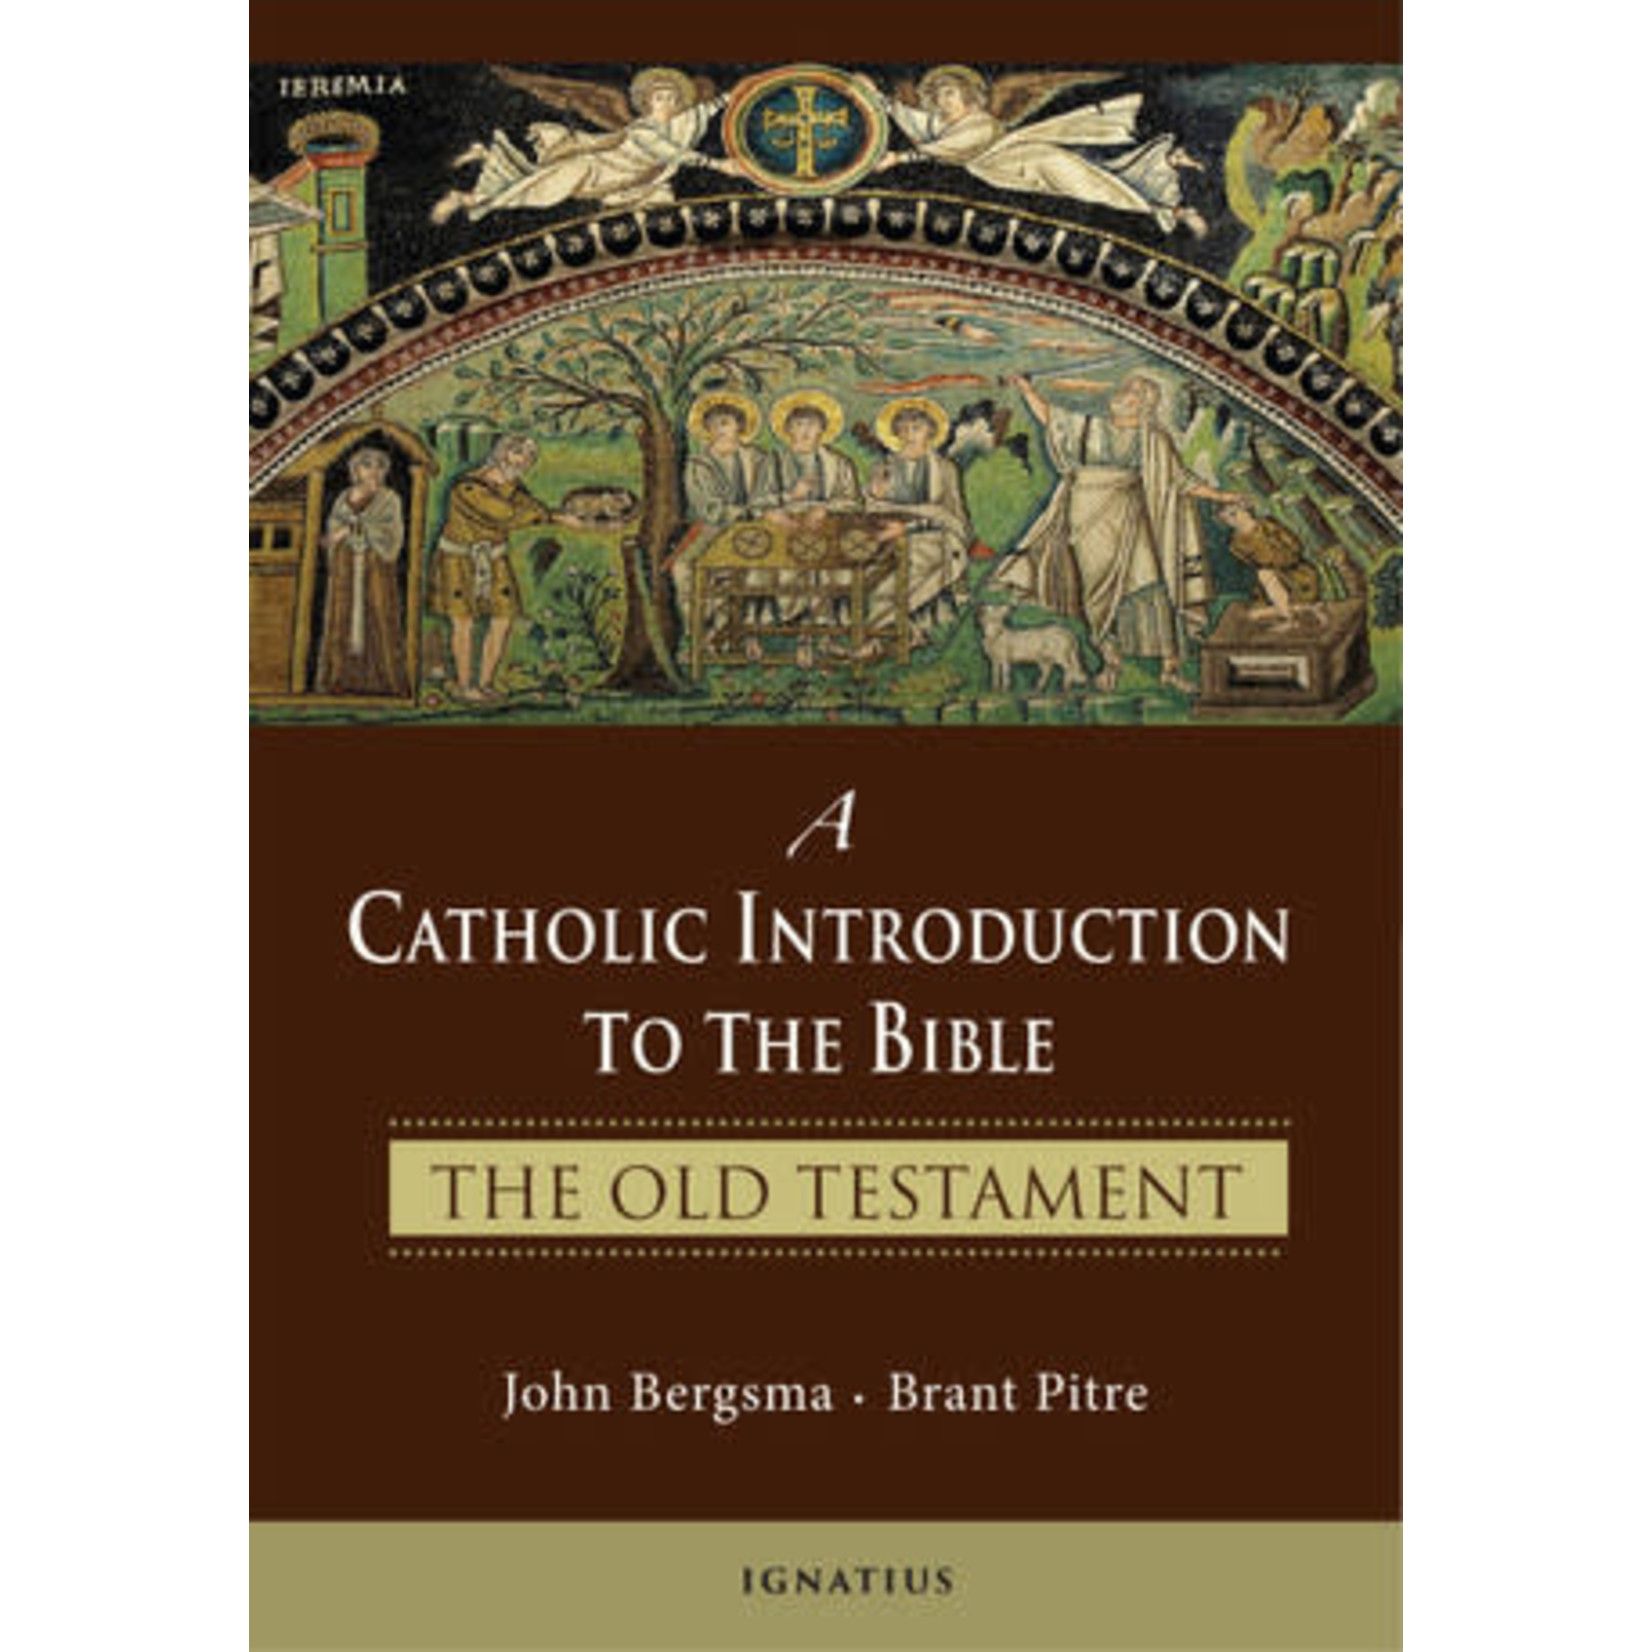 A Catholic Introduction to the Bible-The Old Testament